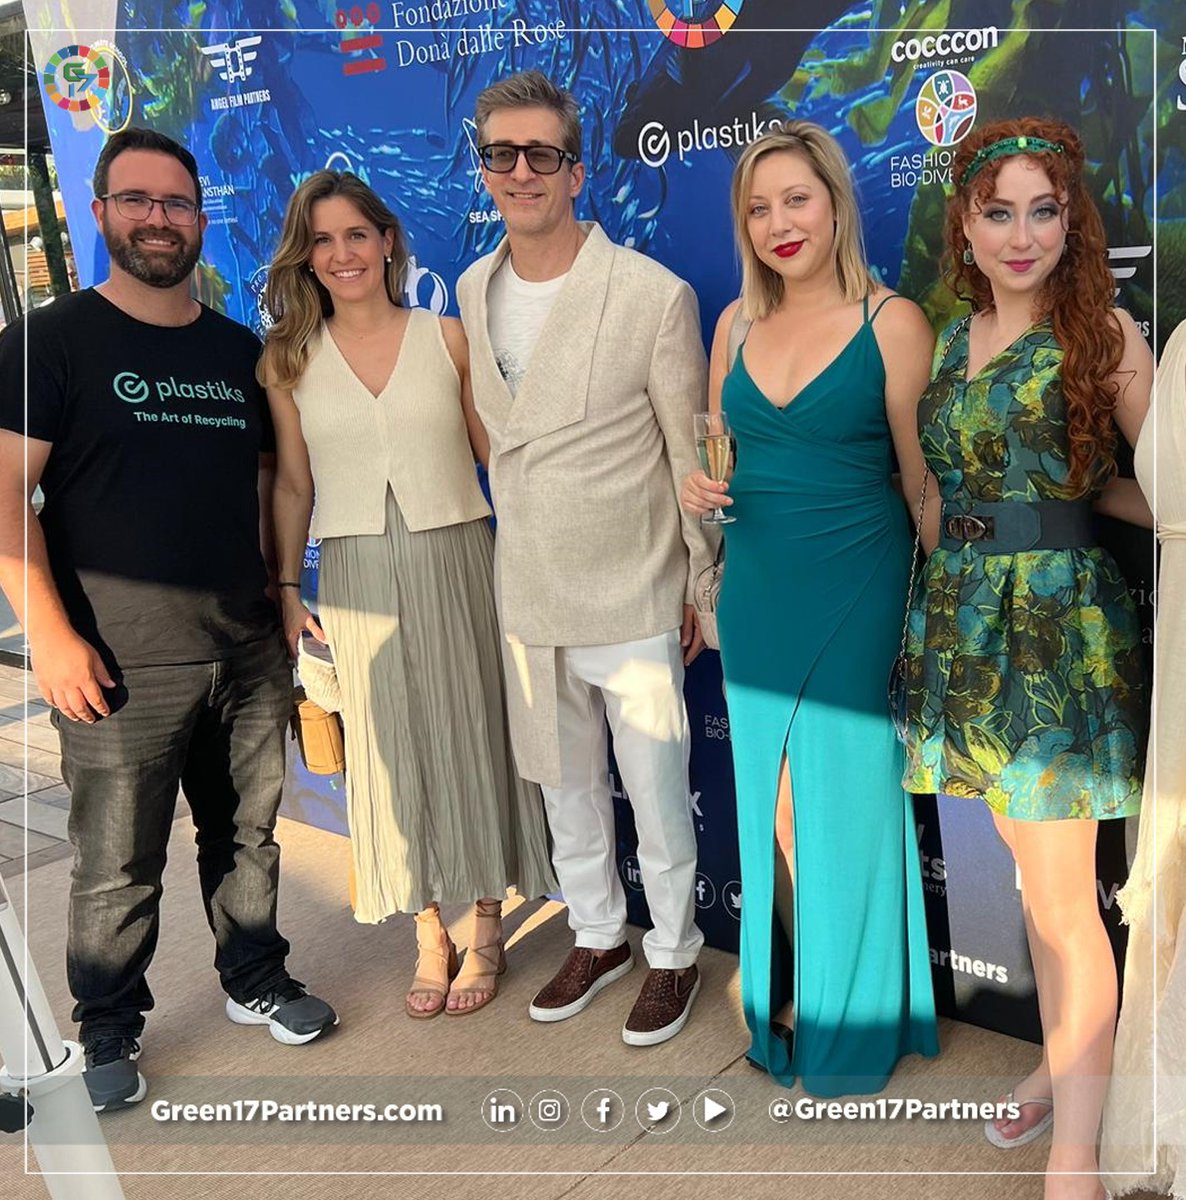 #Green17 CEO @AdeBeauharnais with @kellyalovell of #Younga and the exceptional team from @plastiks! 
@CarltonCannes at the
ONE PLASTIC-FREE OCEAN Blue Gamechanger Event
Our Mission Is To Remove 1 Million Kg Of Plastic From The Ocean By The End Of 2023!
#Cannes2023 #biodiversity